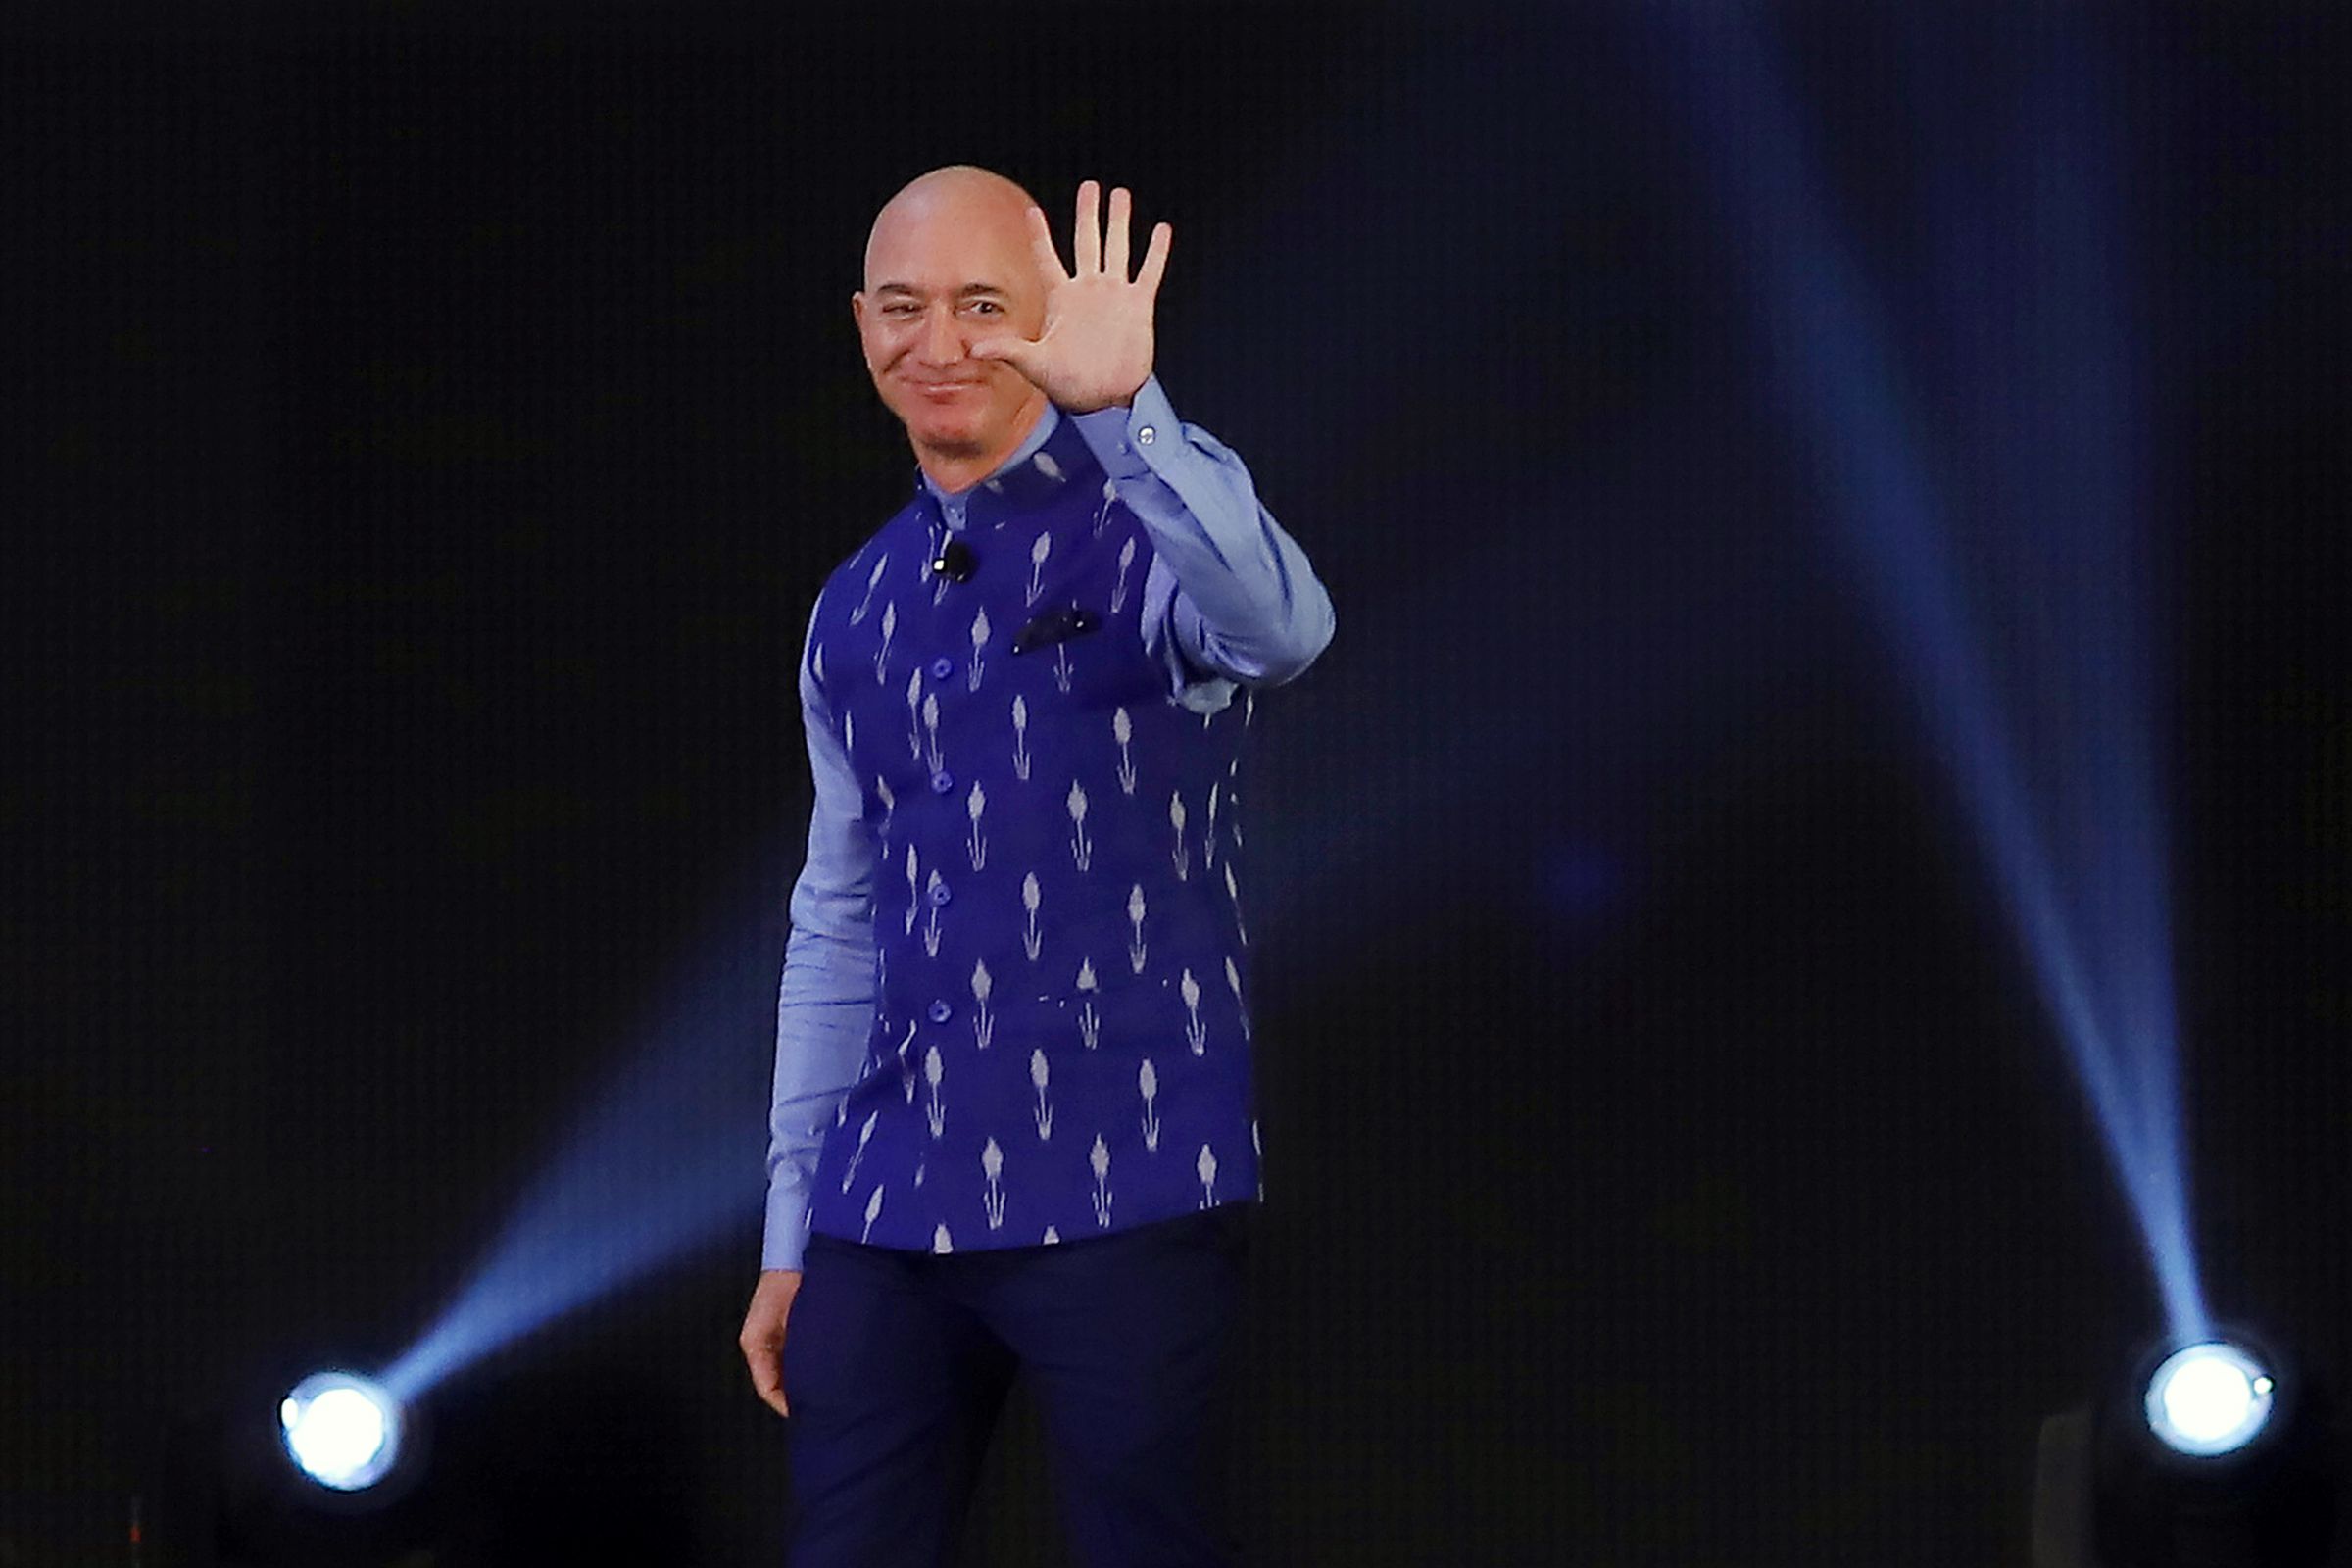 Jeff Bezos’s India Visit Marked By Probe and Protests